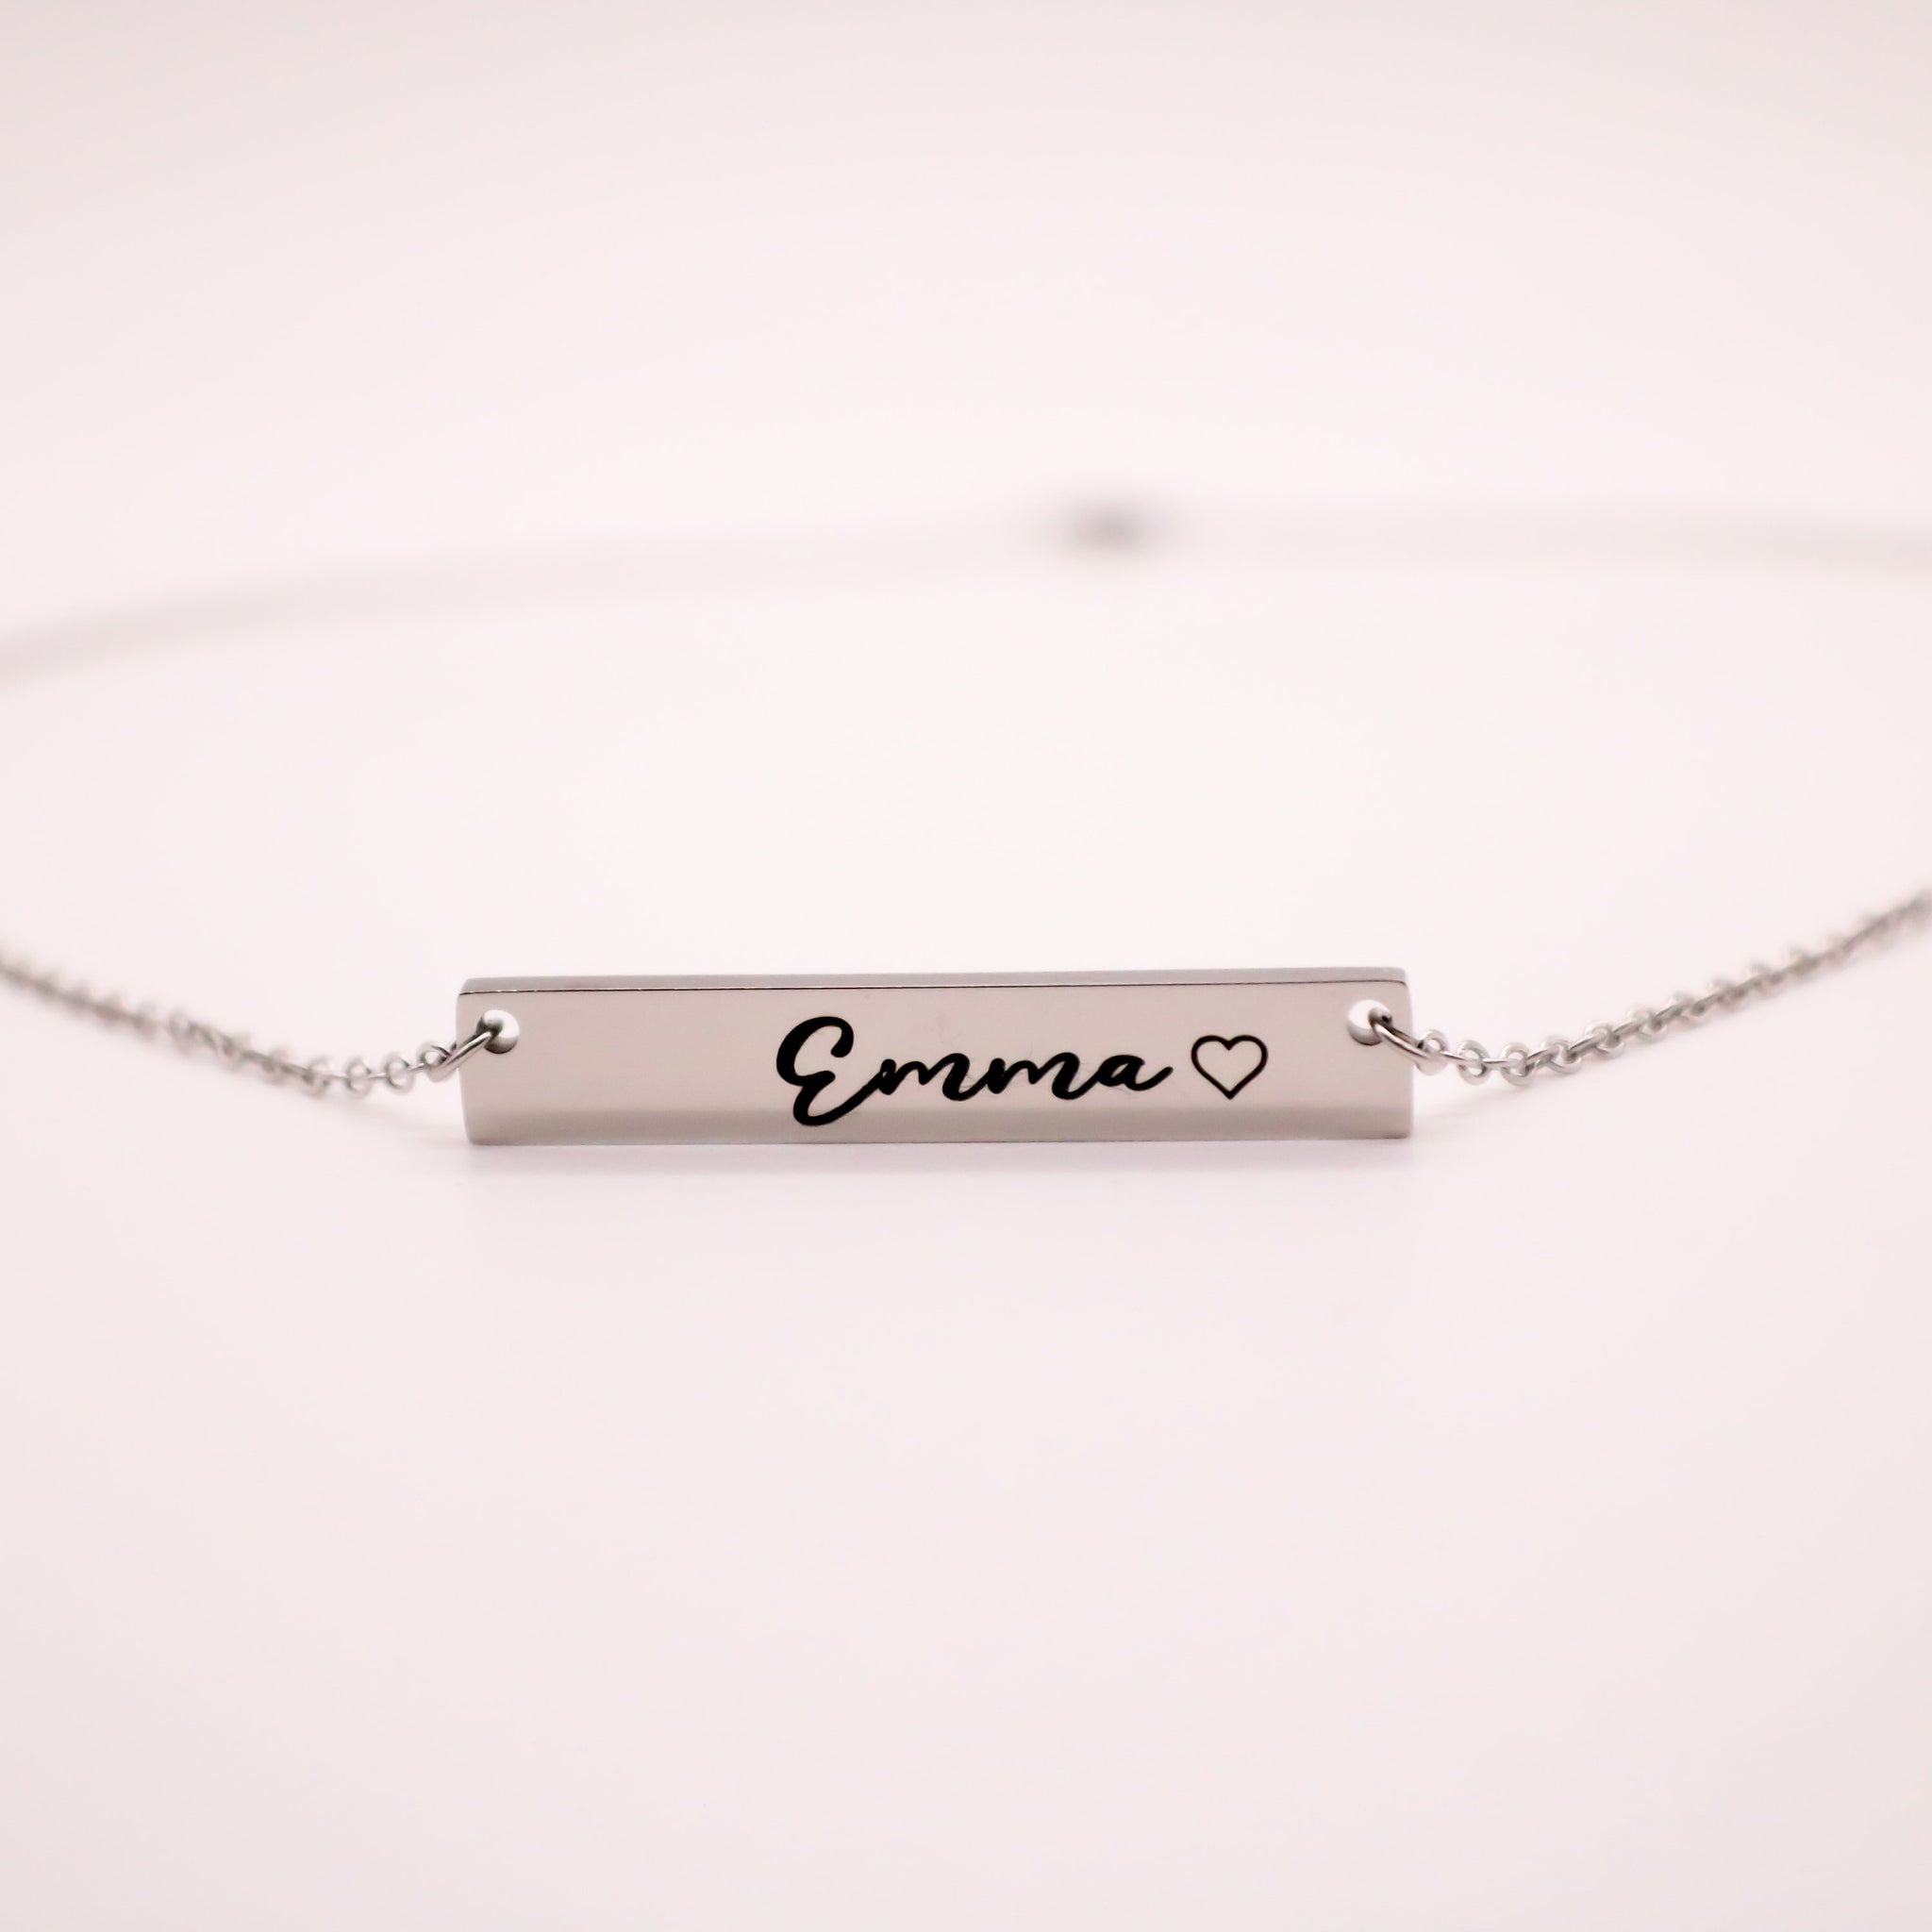 Custom Name necklace, Name plate necklace, Personalized bar necklace, Engraved necklace, Personalized jewelry,